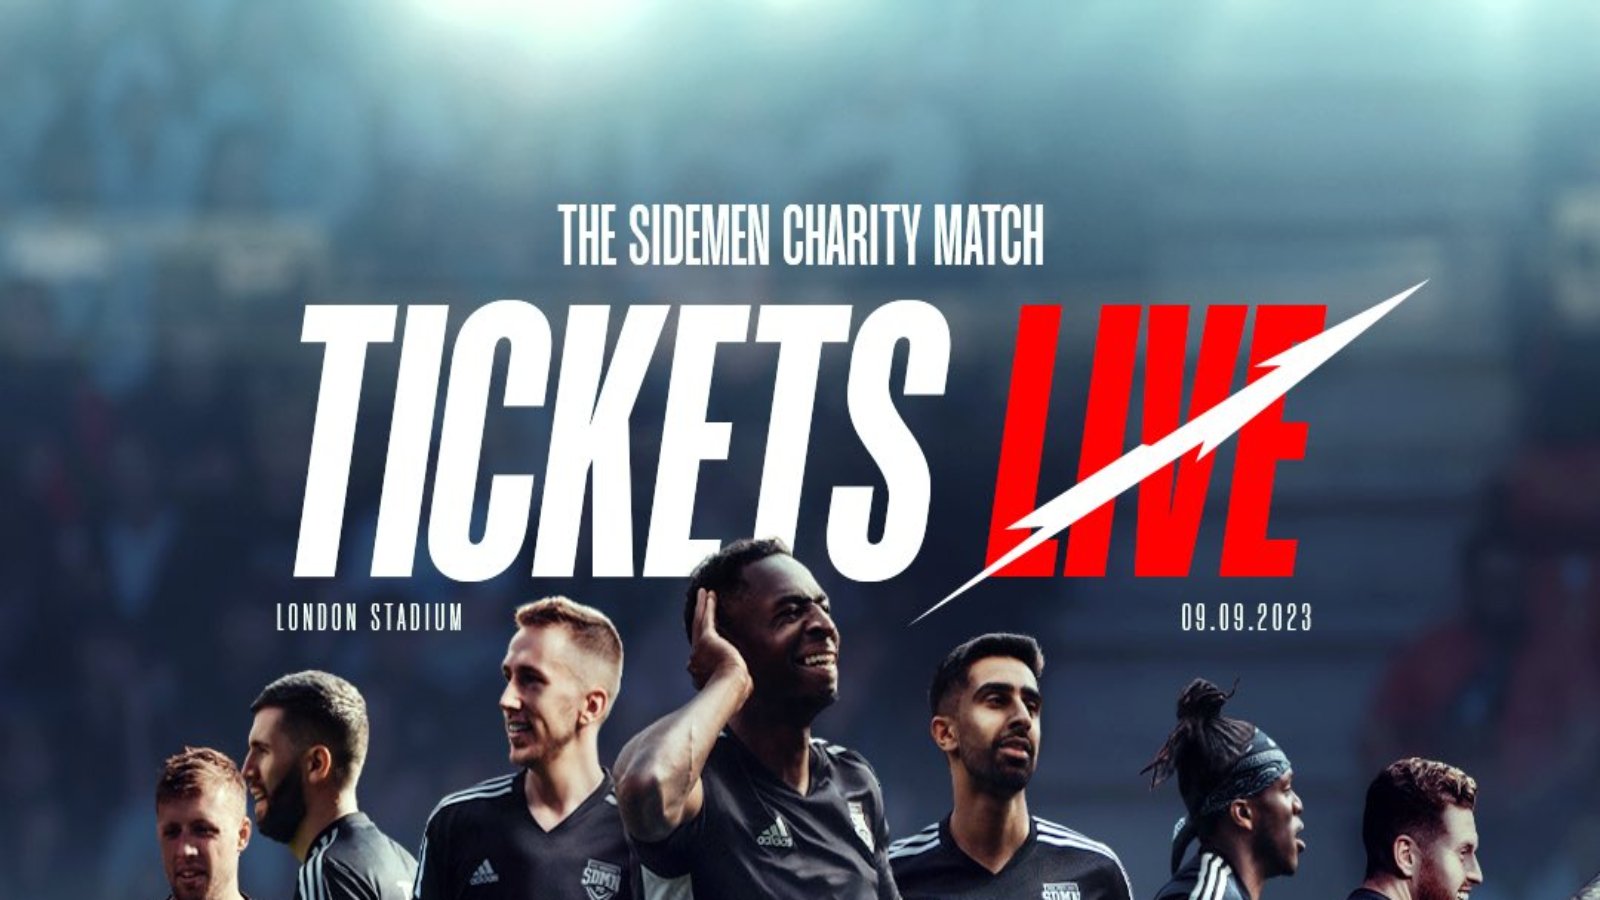 Sidemen Charity Football Match sells out in 90 minutes with MrBeast and